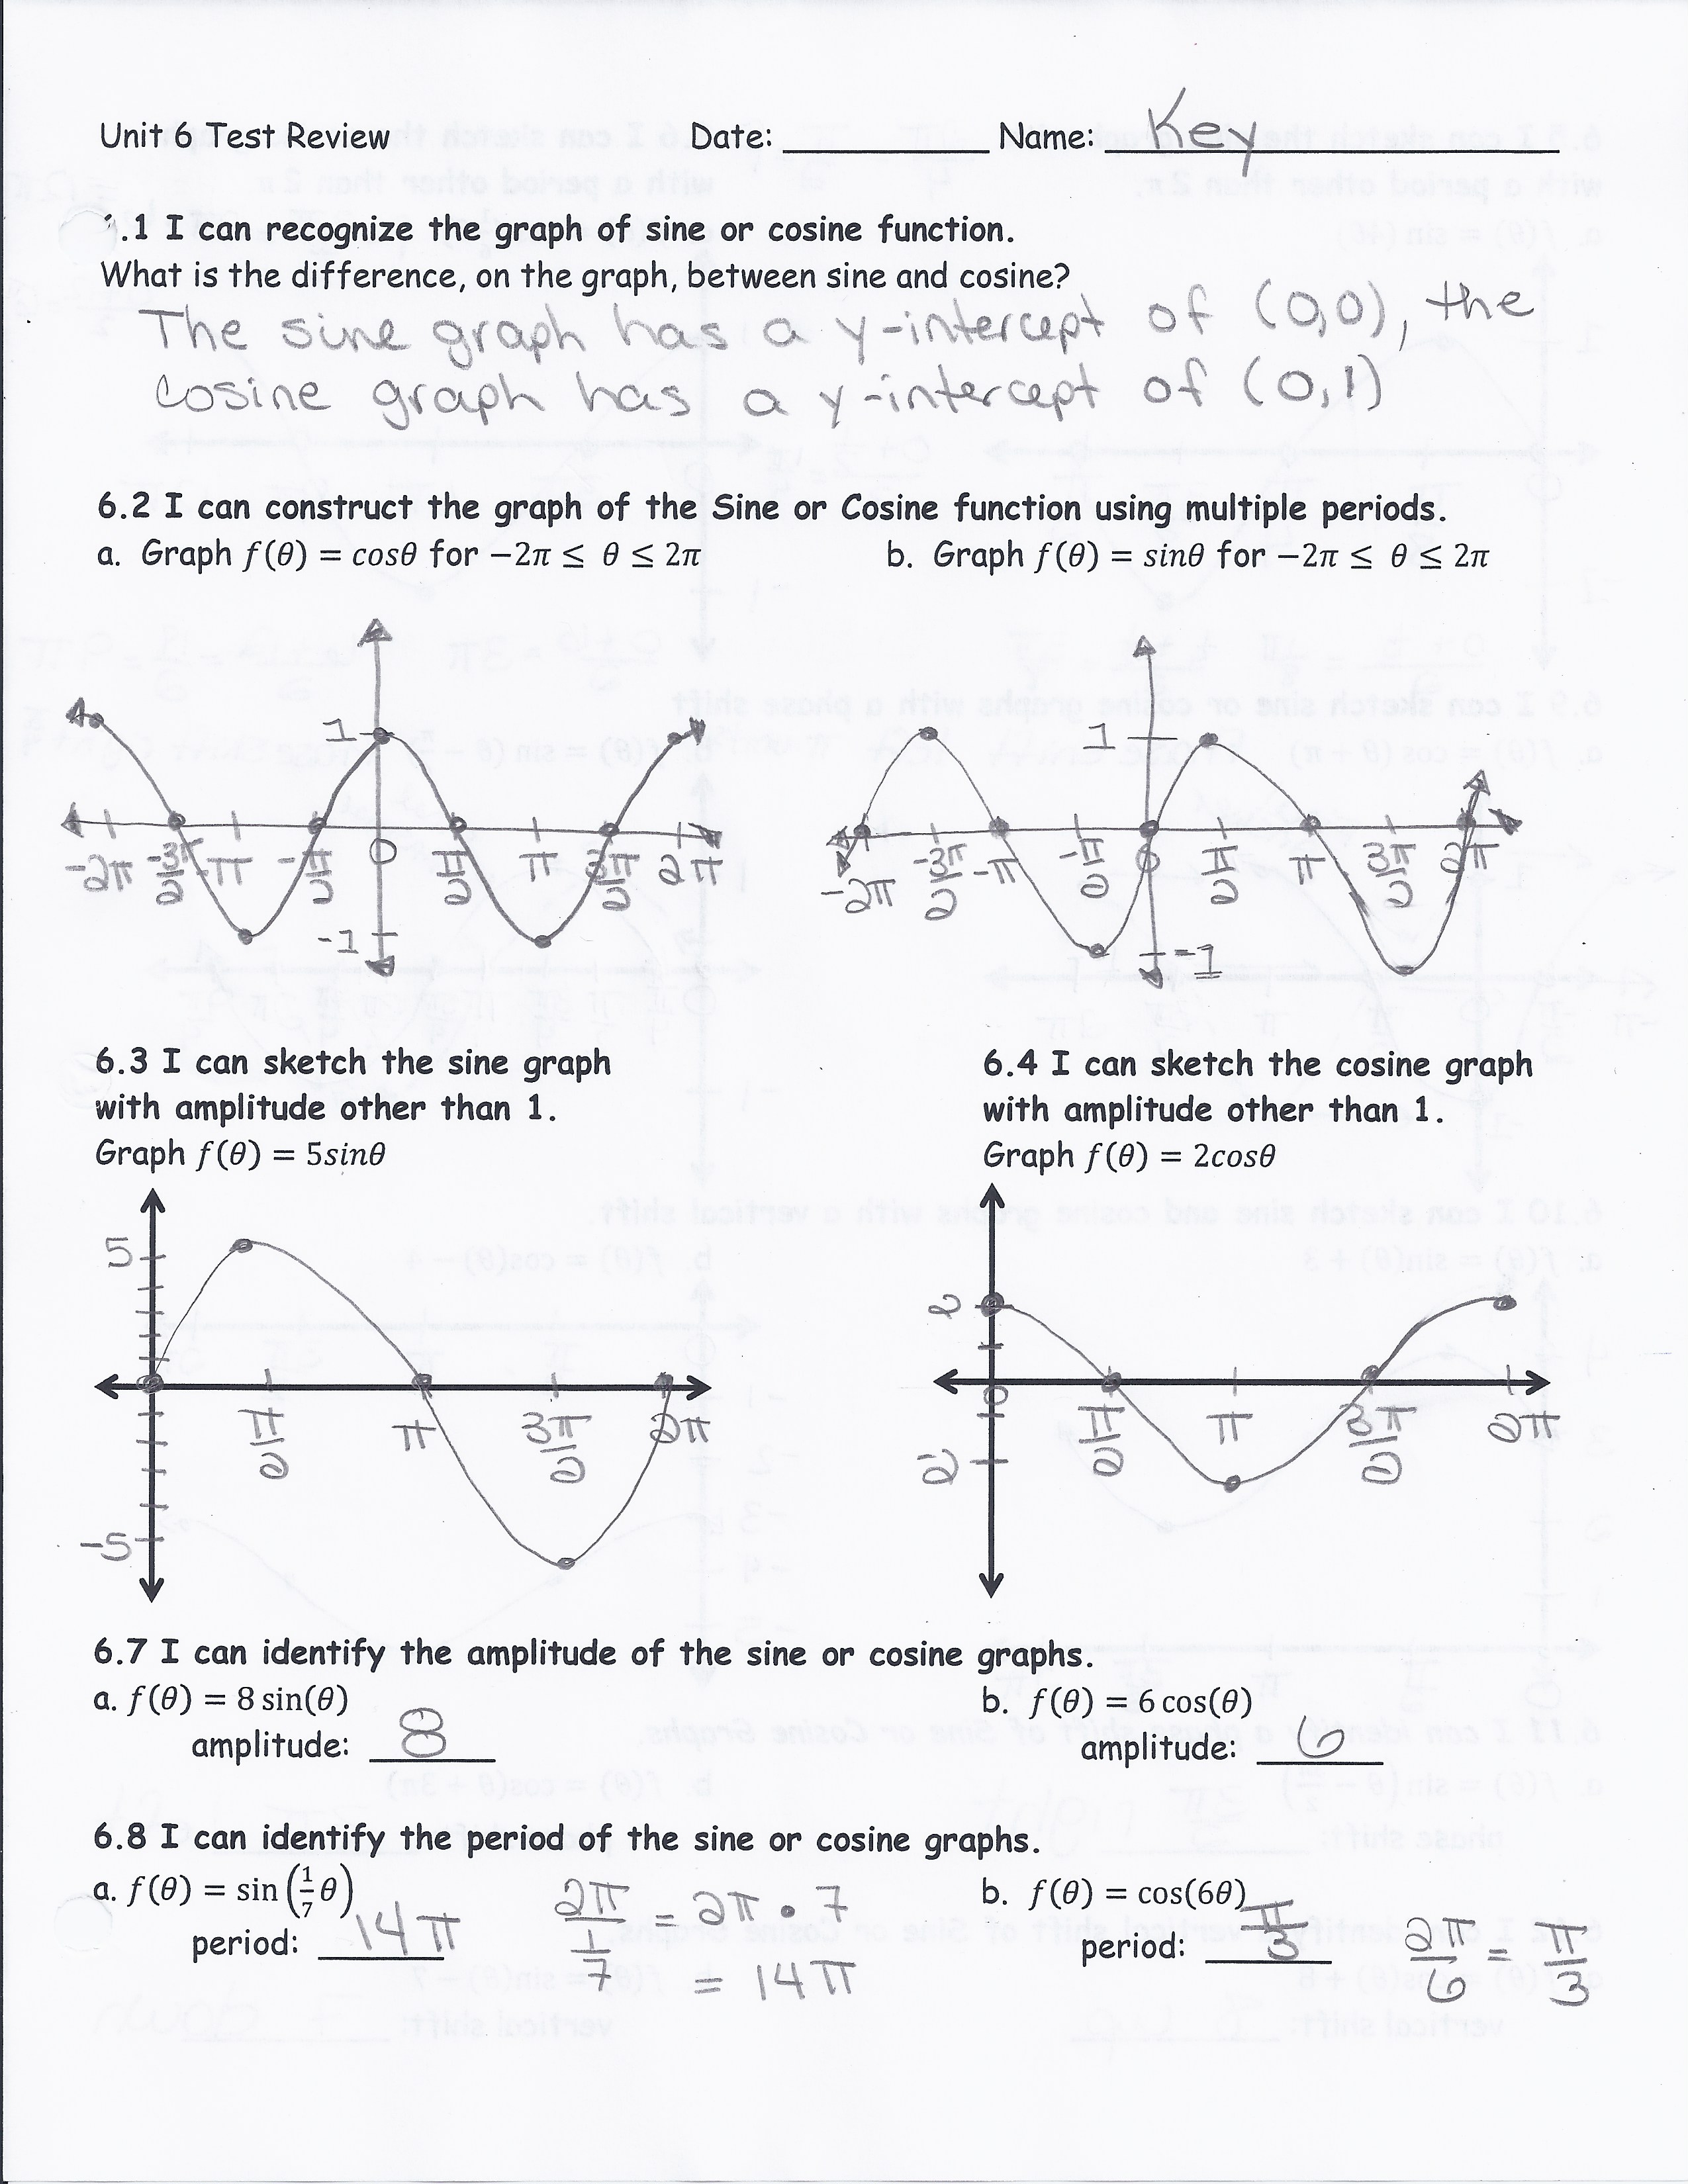 Unit 22 Graphs of Sine and Cosine For Graphing Trig Functions Worksheet